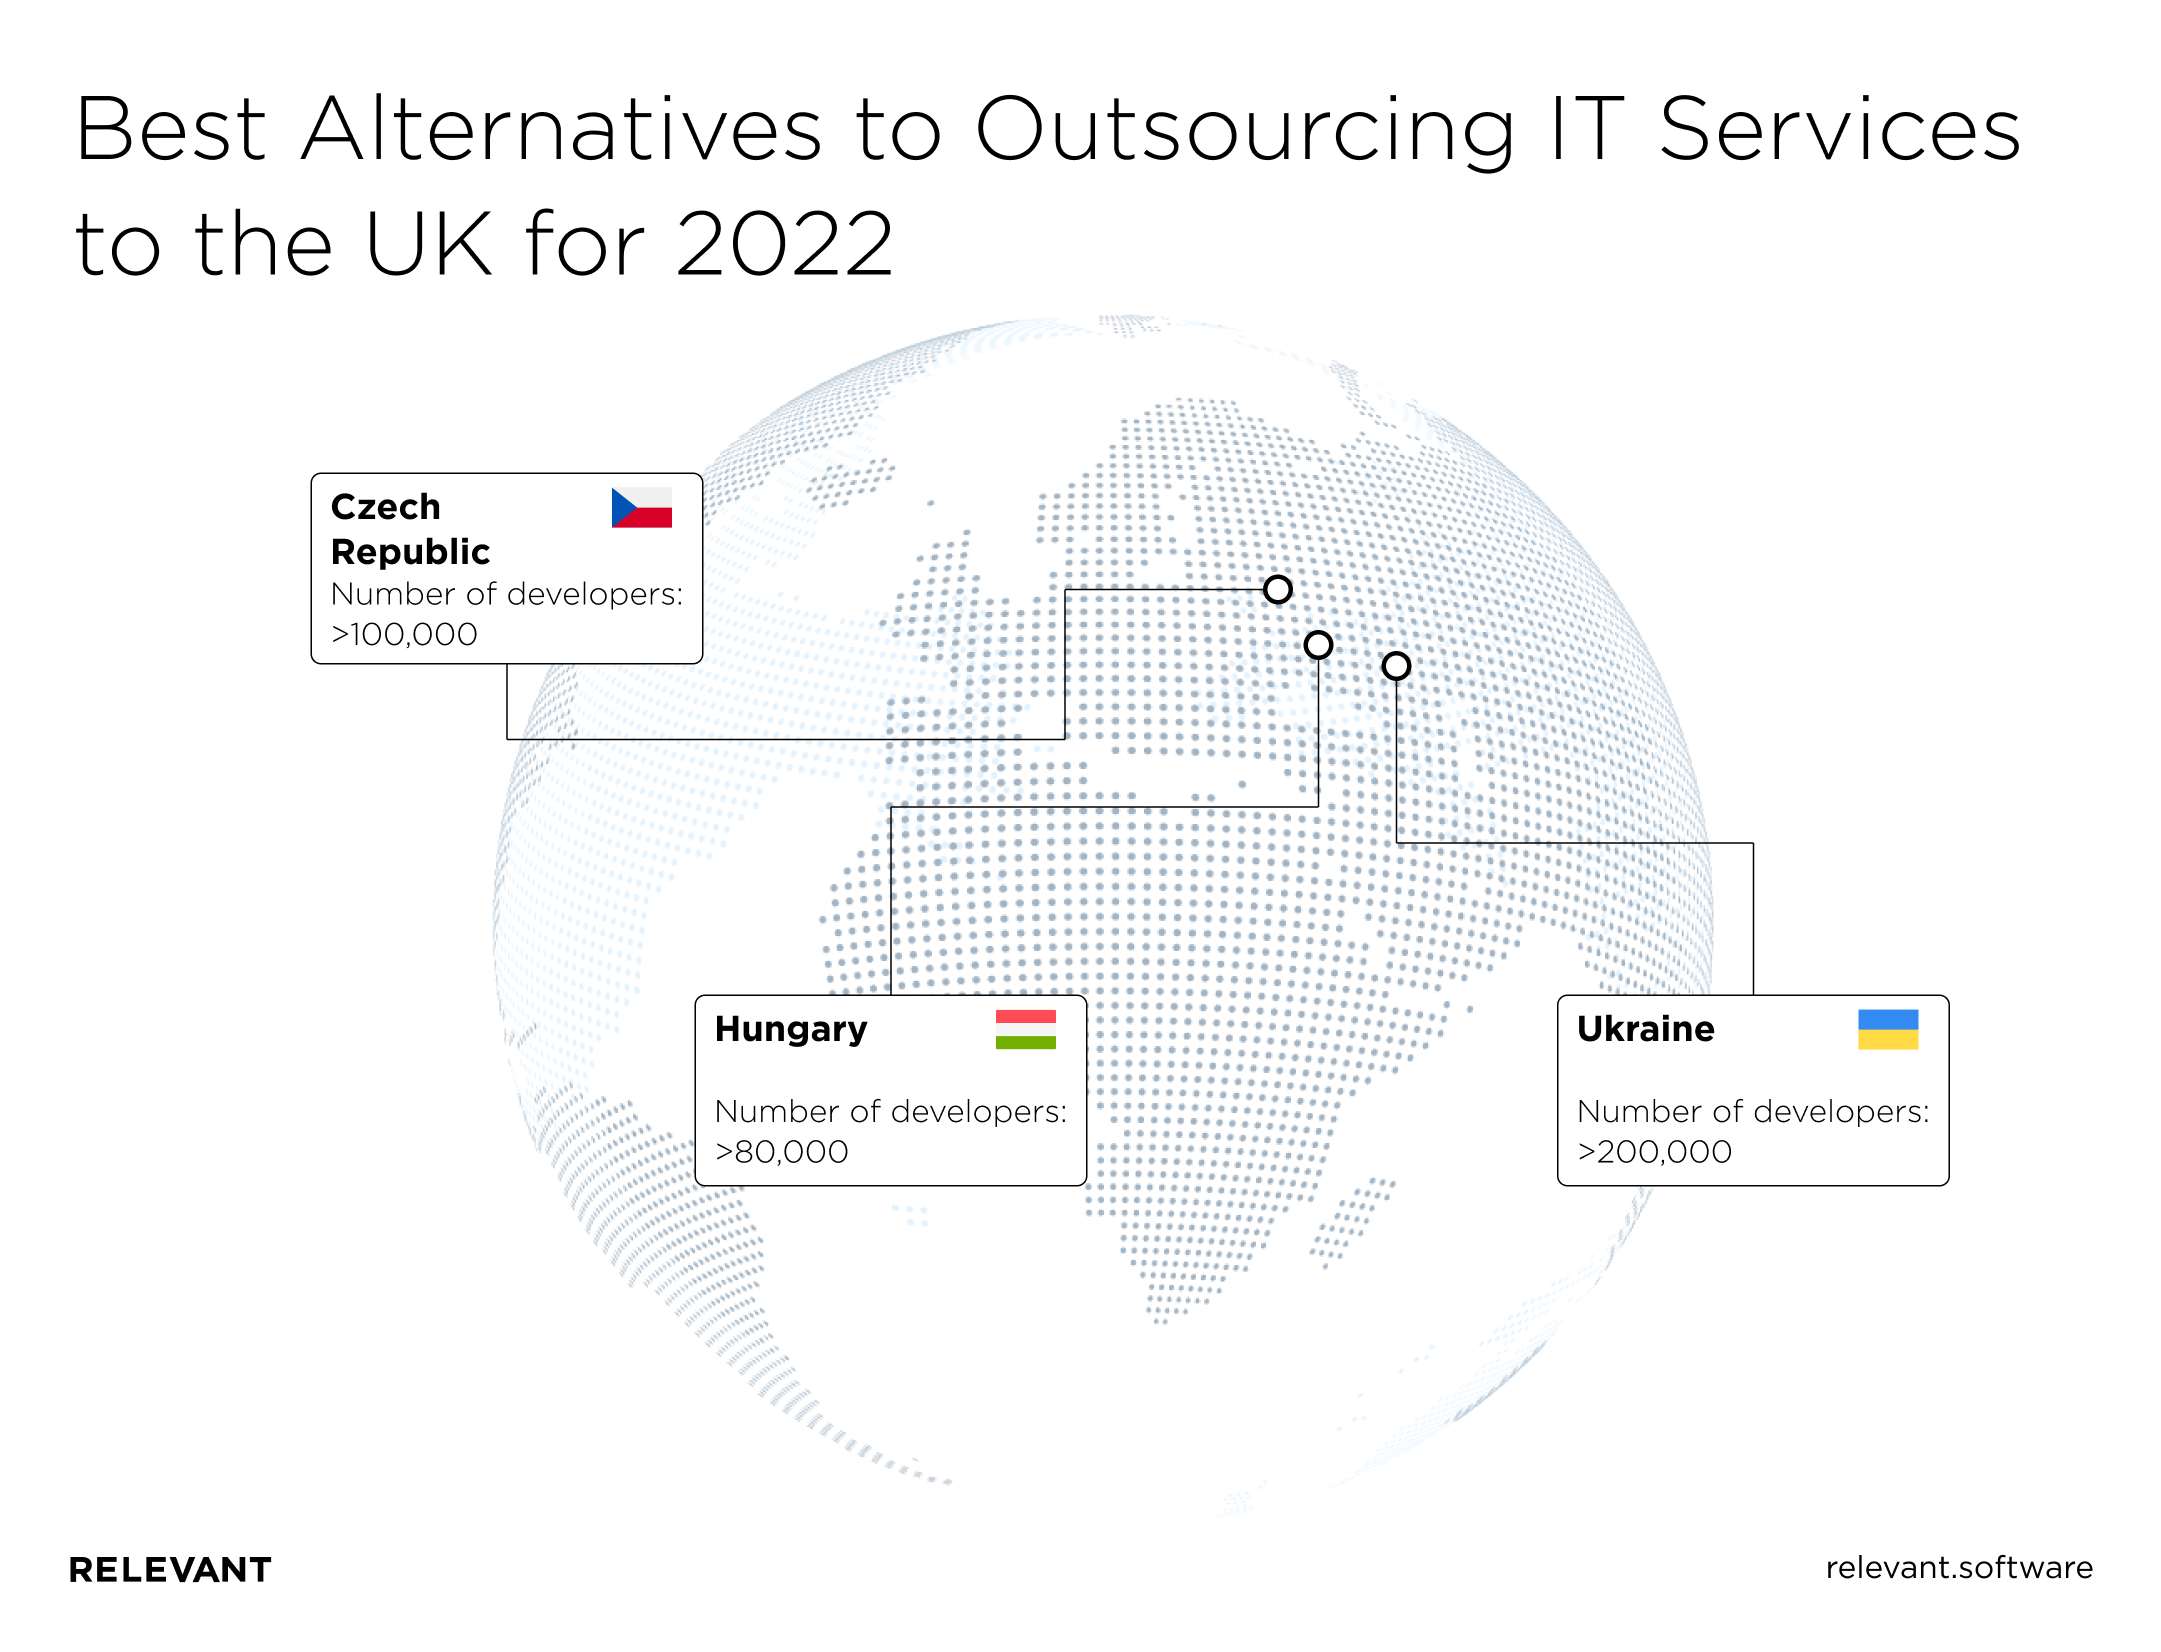 Best Alternatives to Outsourcing IT Services to the UK for 2022